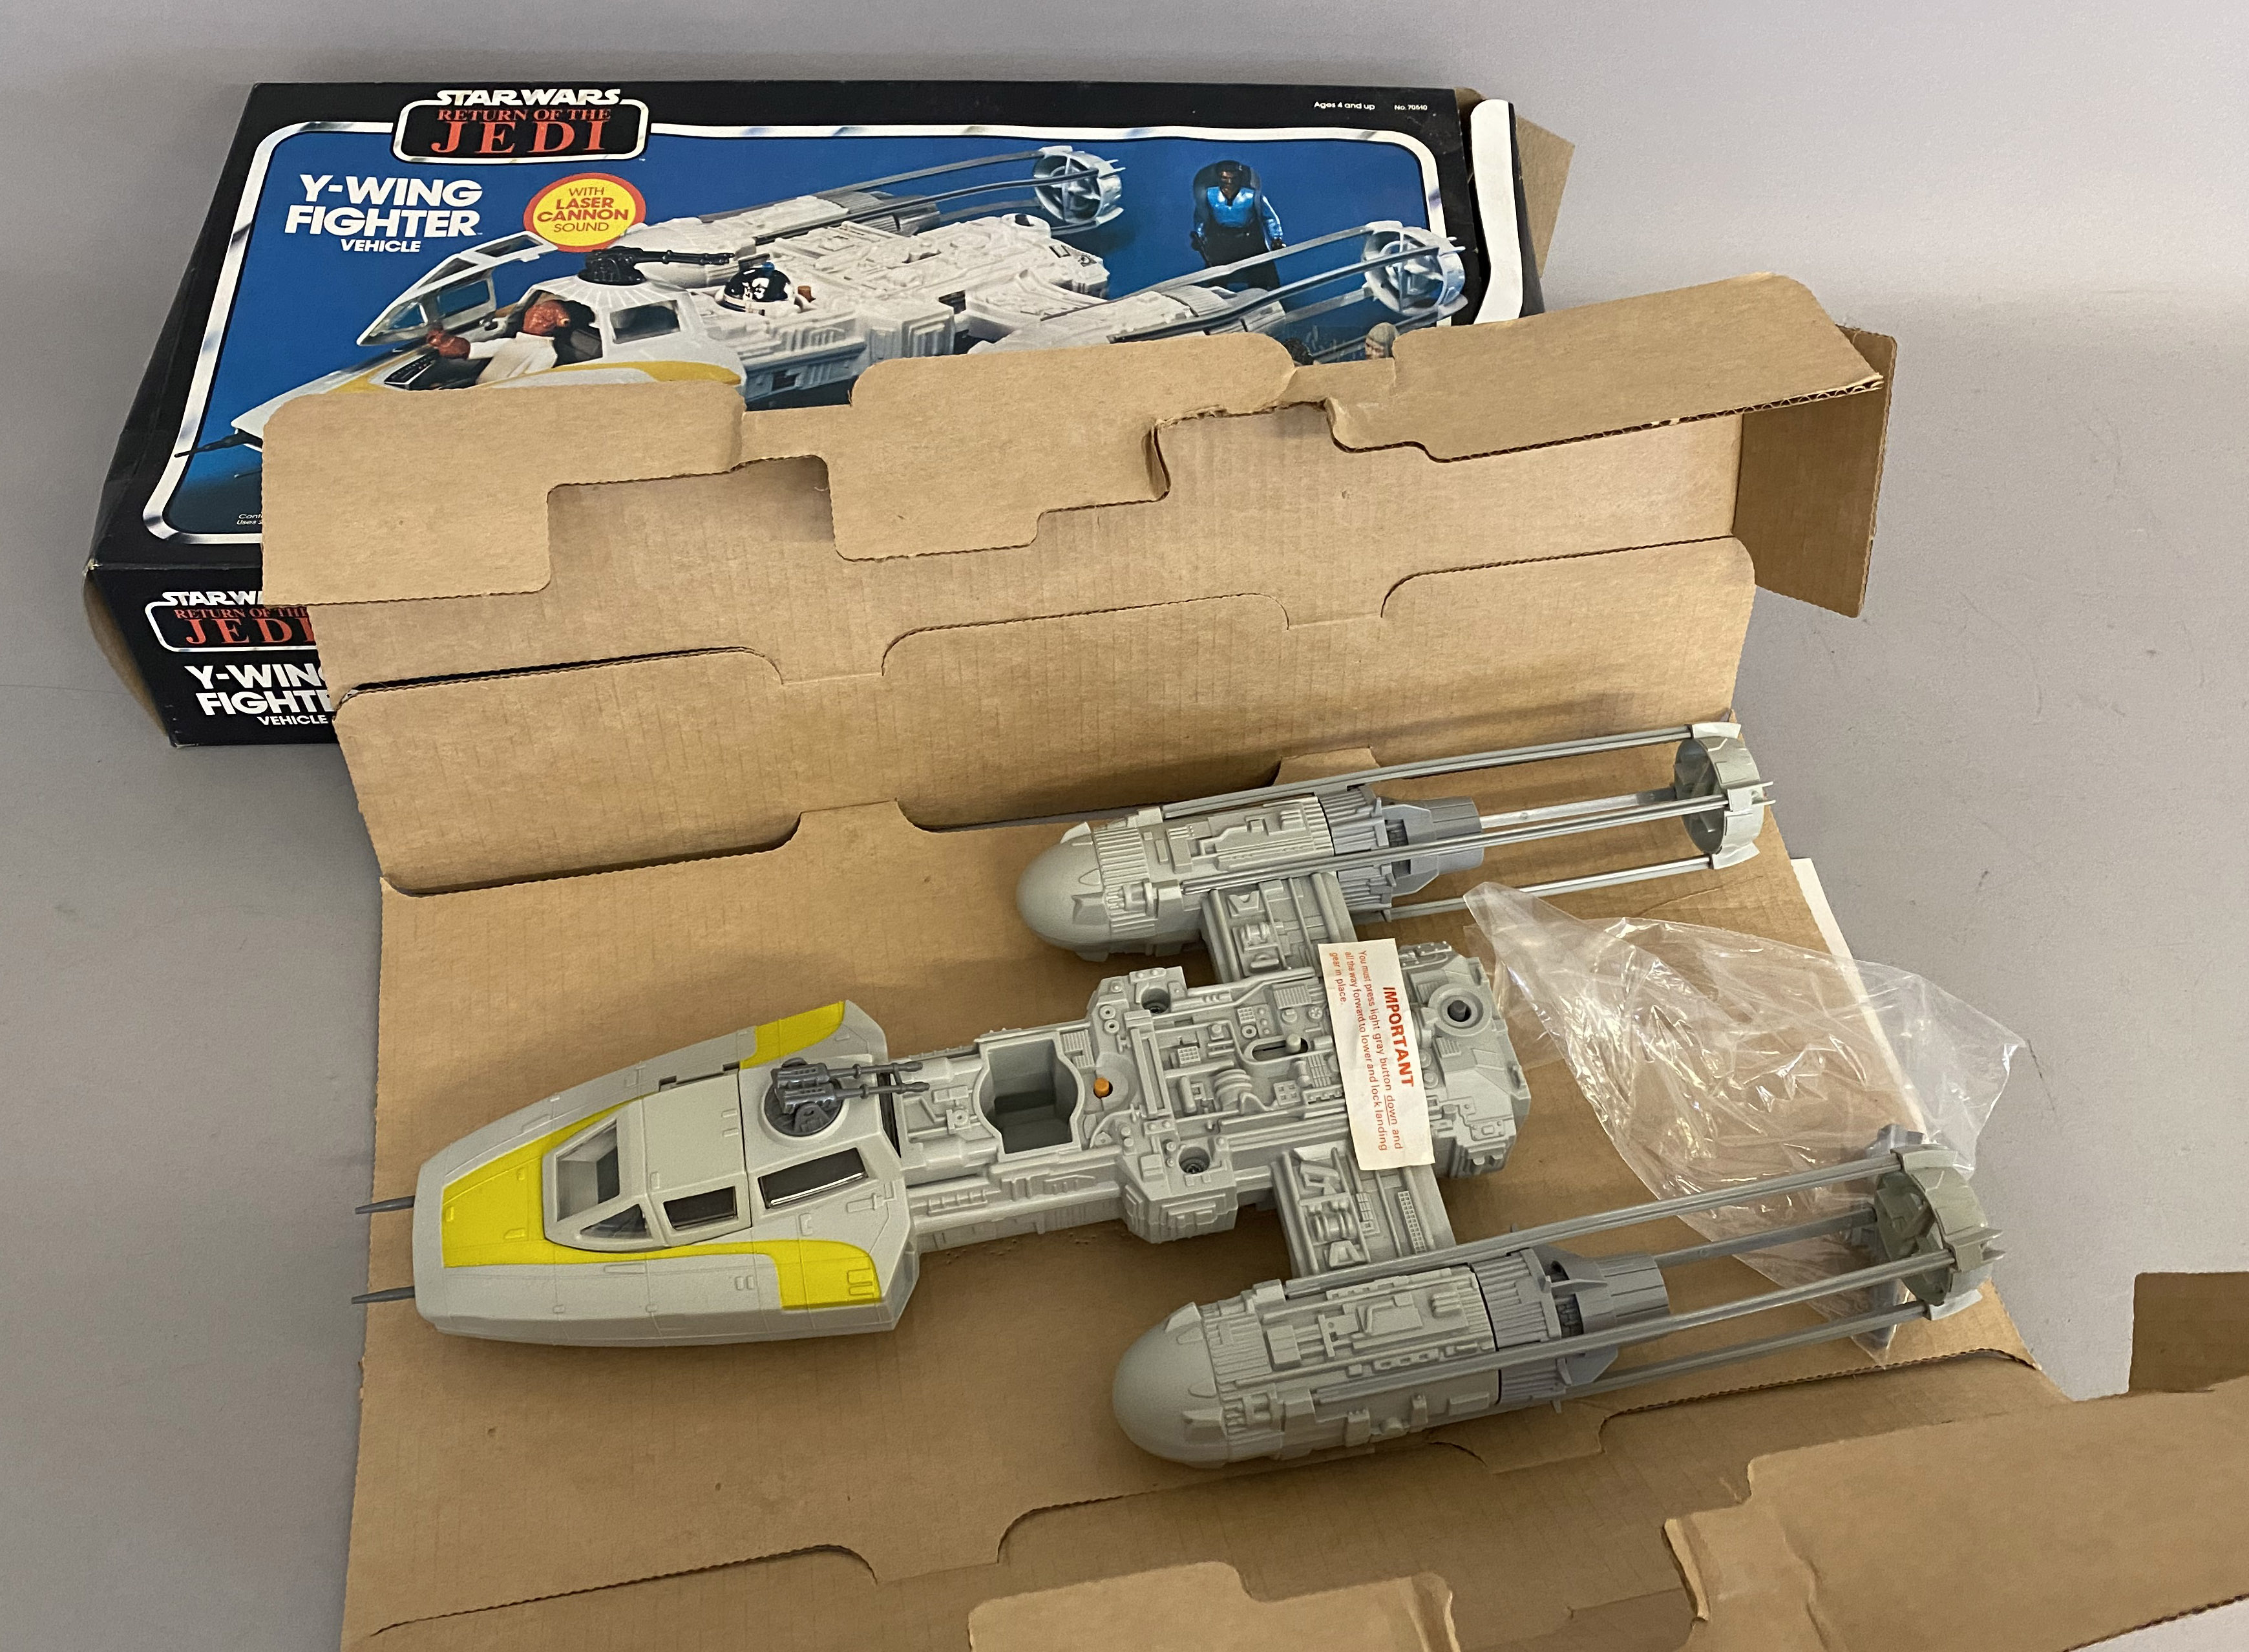 Kenner Star Wars ROTJ Return Of The Jedi 70510 Y-Wing Fighter Vehicle. Boxed. Decals unused. - Image 2 of 3